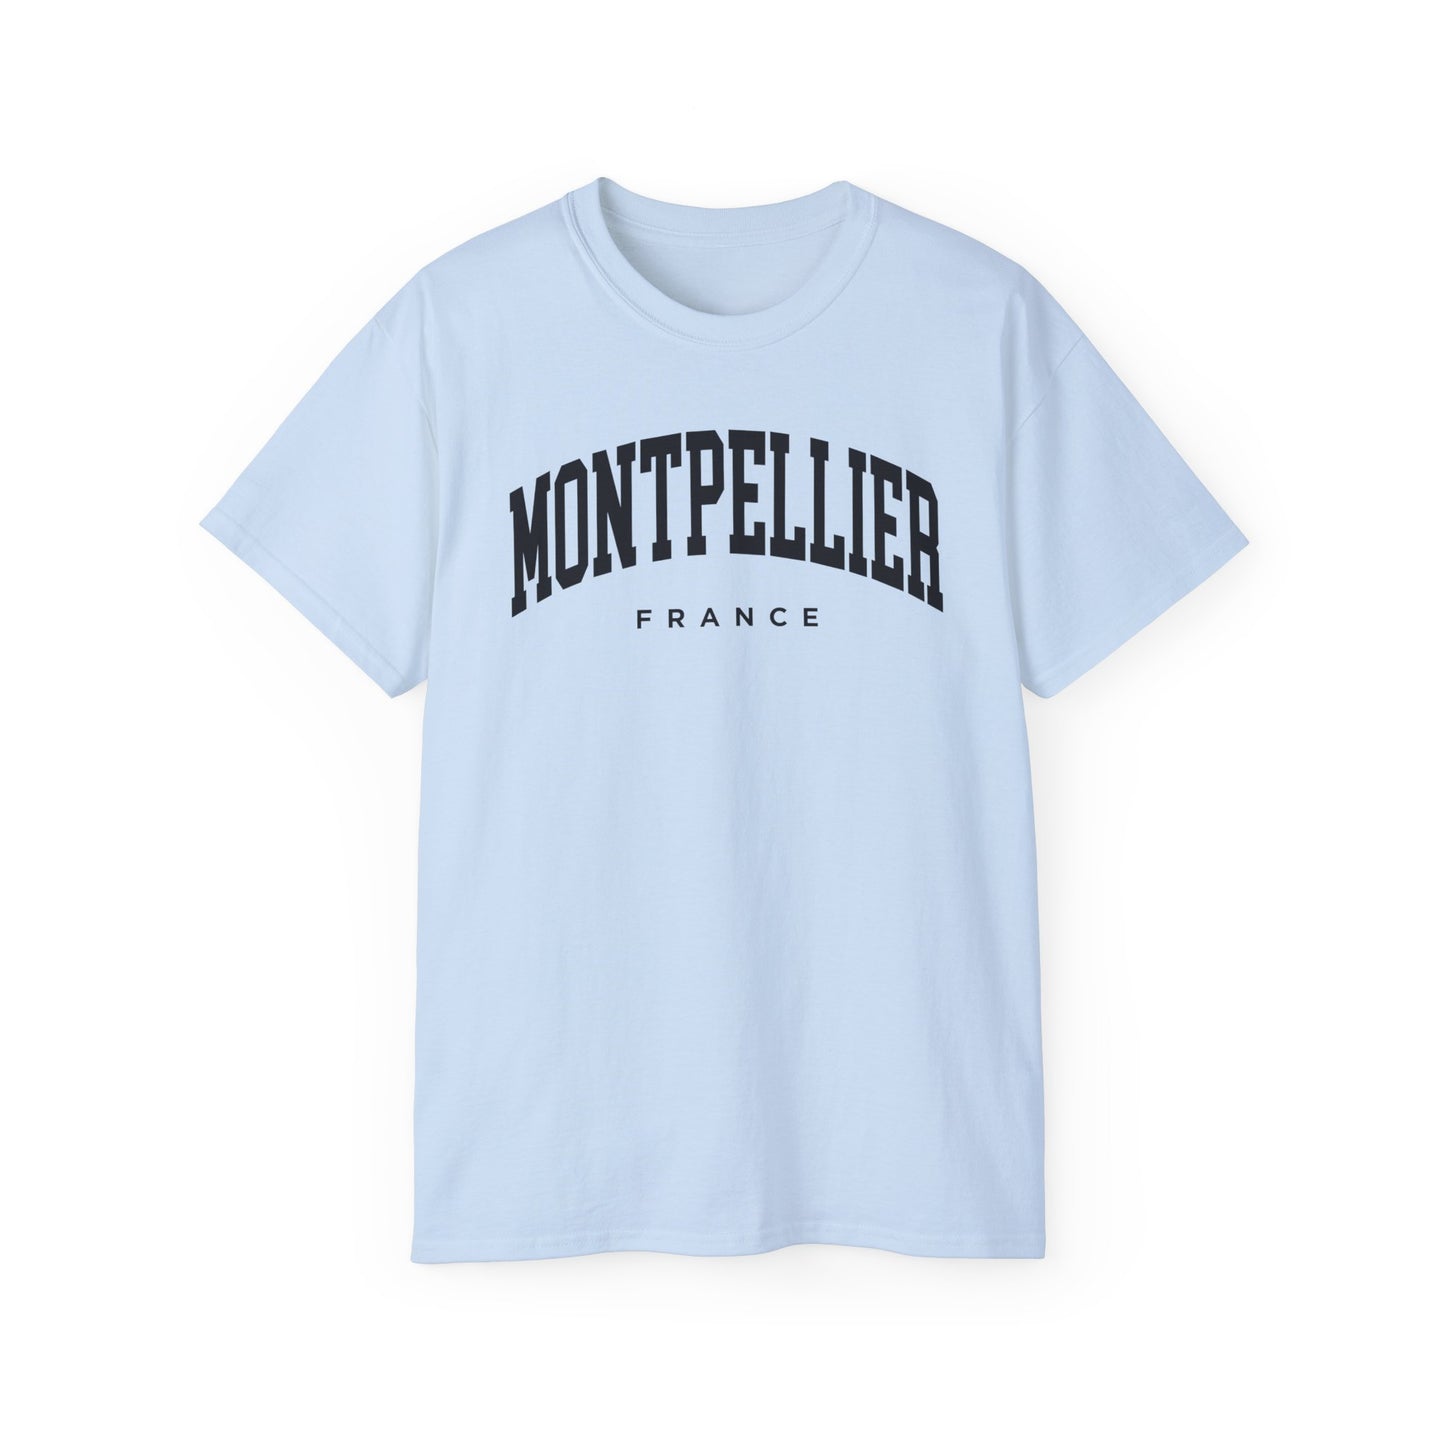 Montpellier France Tee